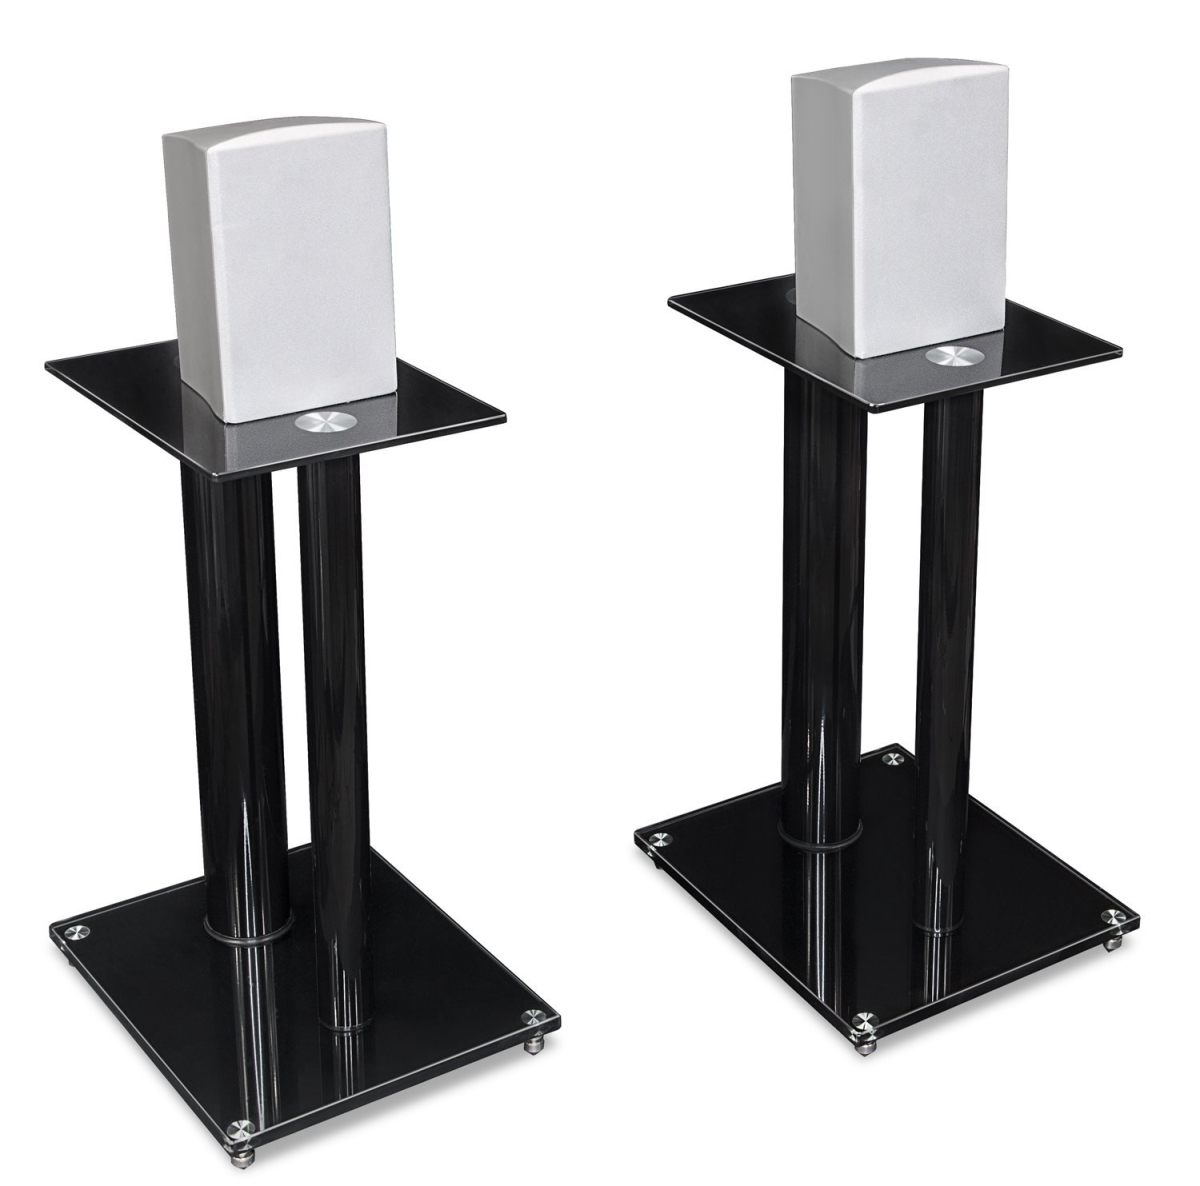 Picture of Mount-It MI-28B 2 Satellite Speaker Stands for Surround Sound Home Theaters, Glass & Aluminum - Clear & Black